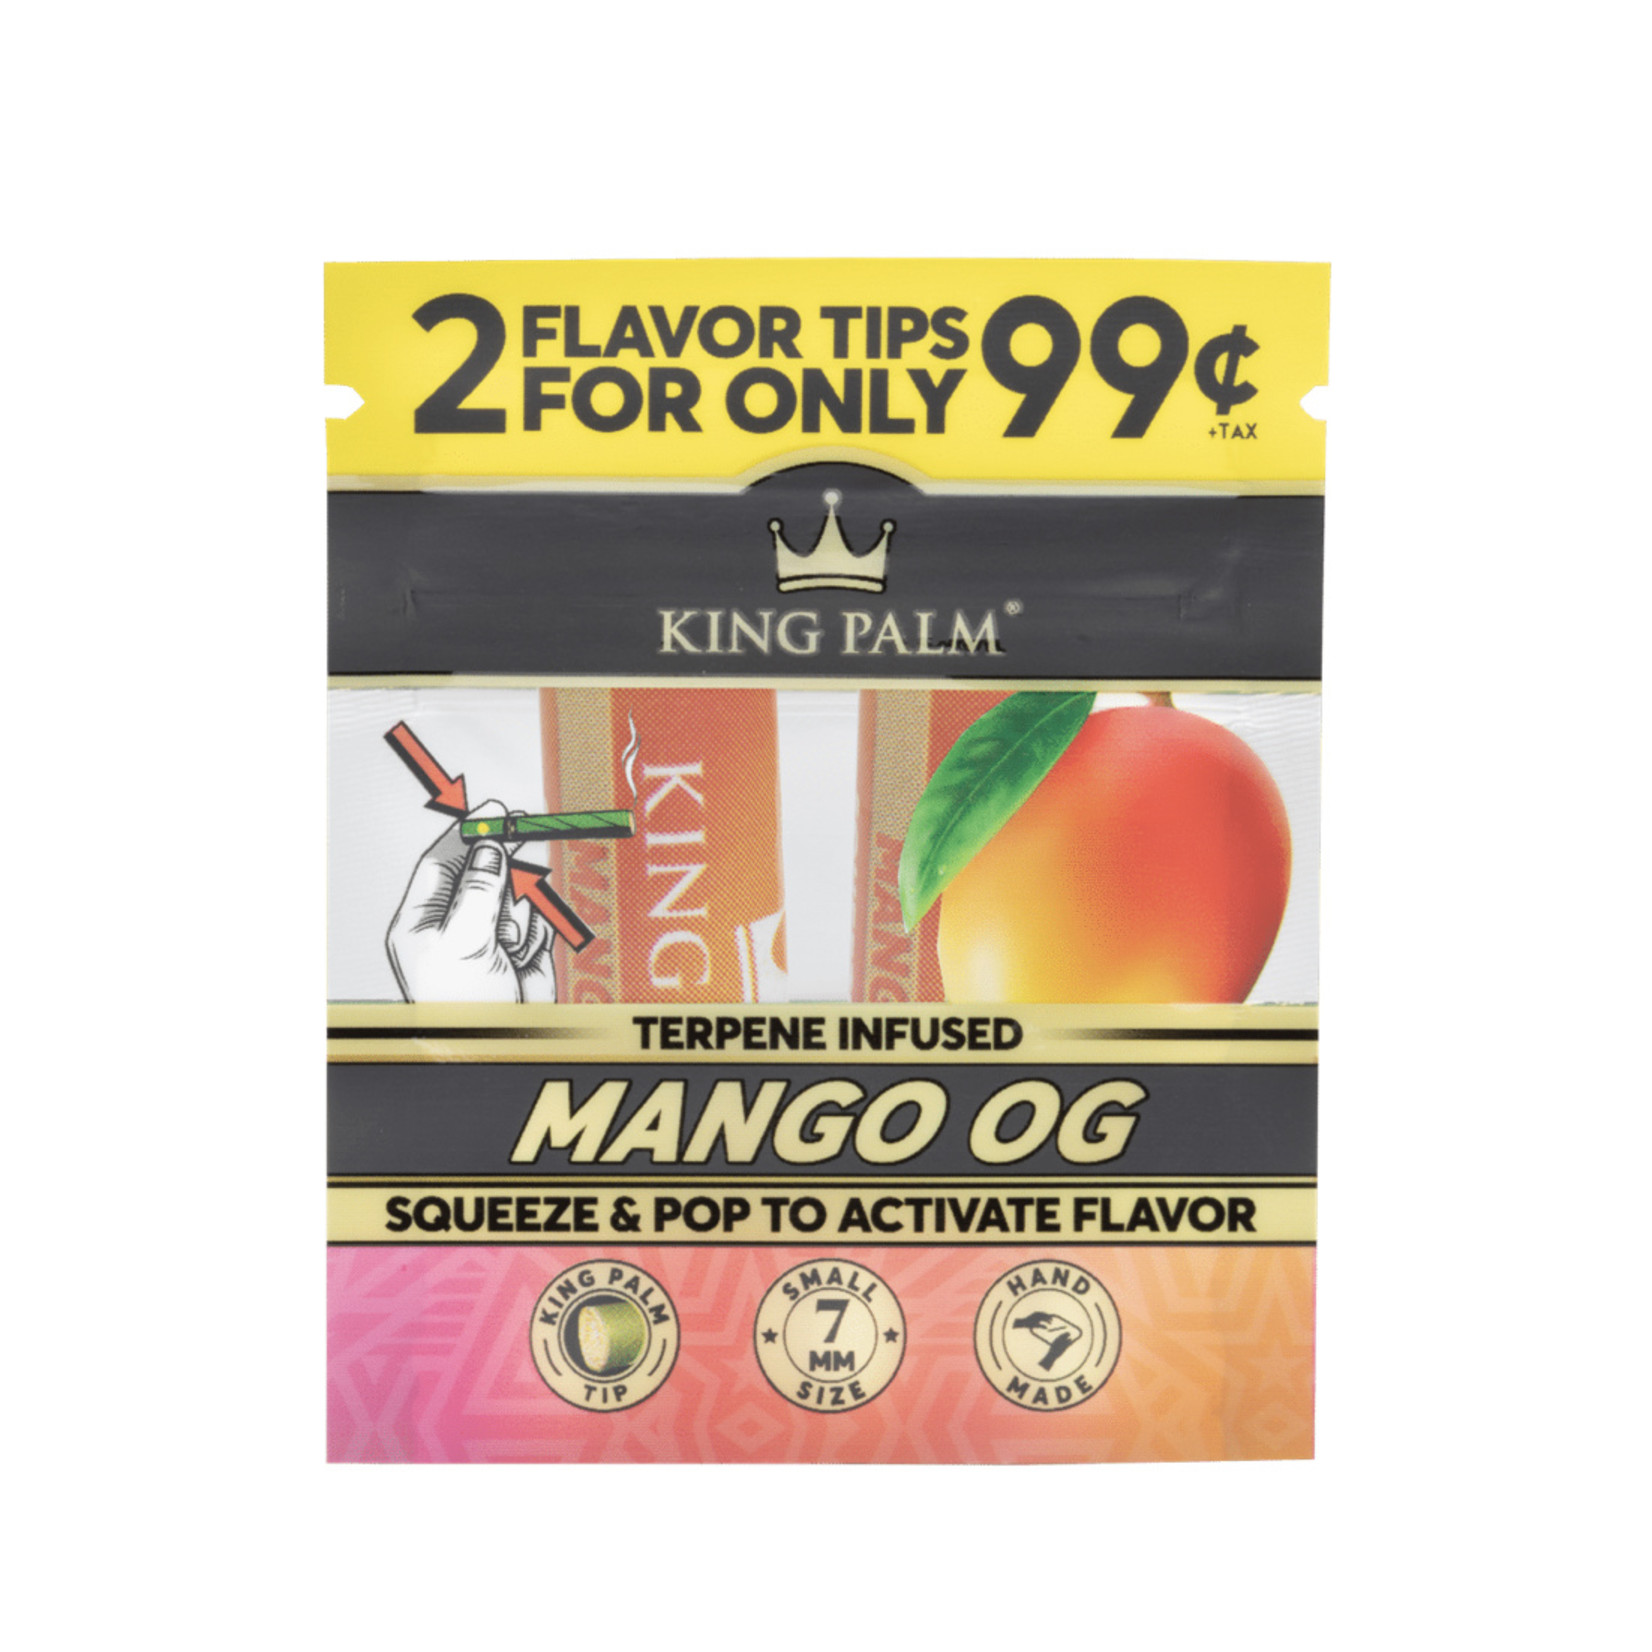 King Palm King palm flavor tips